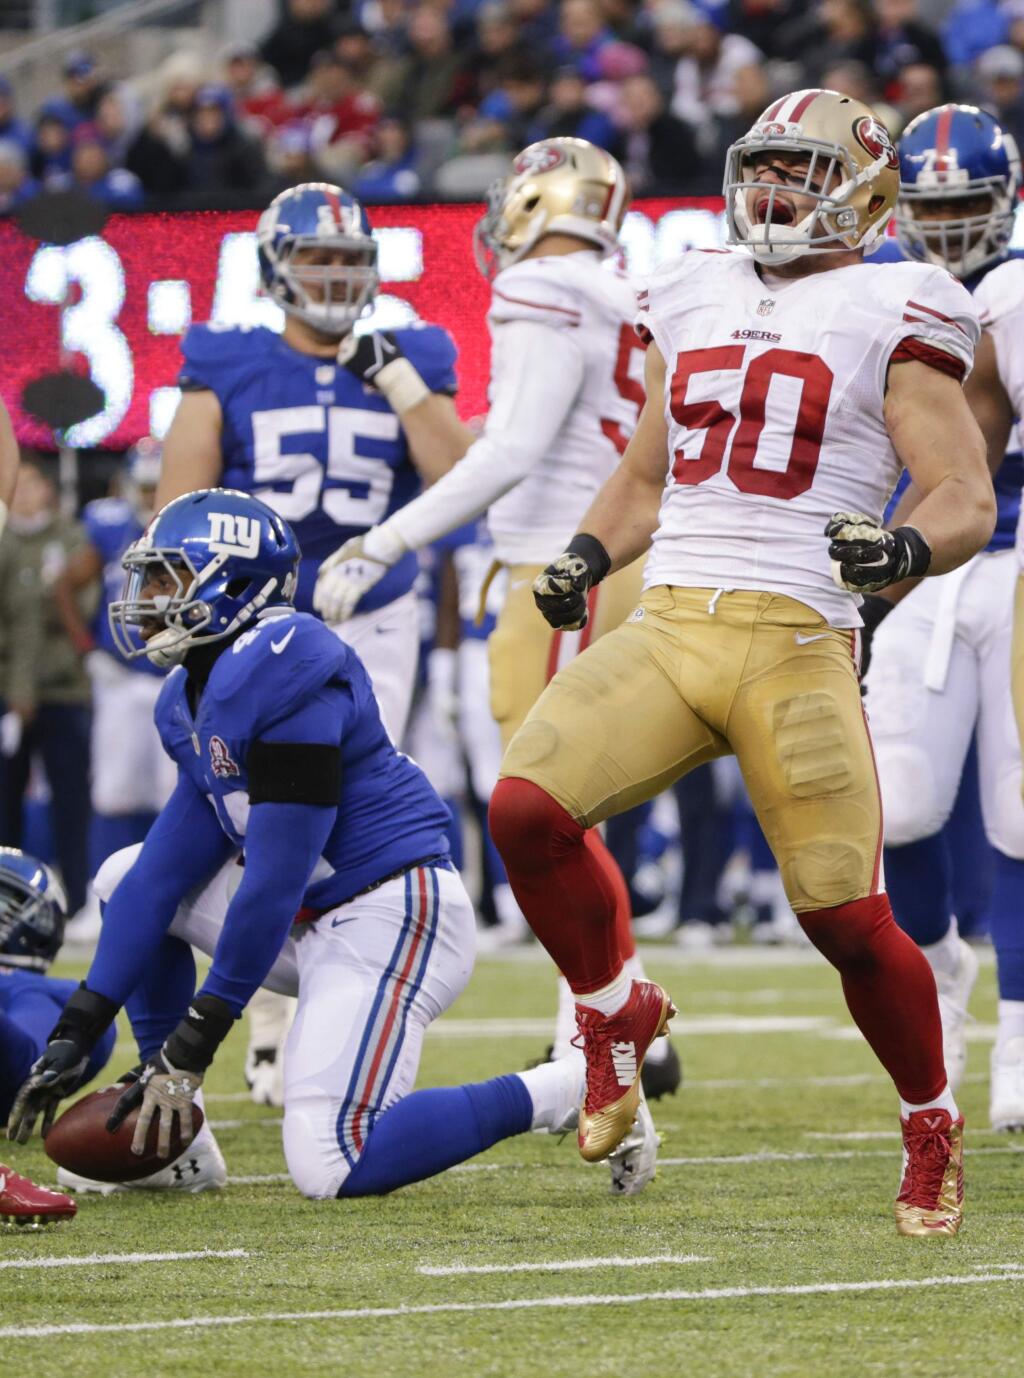 San Francisco 49ers inside linebacker Chris Borland (50) celebrates after tackling New York Giants running back Andre Williams (44) in the backfield during the second half of a game Sunday, Nov. 16, 2014, in East Rutherford, N.J. (AP Photo/Julio Cortez)